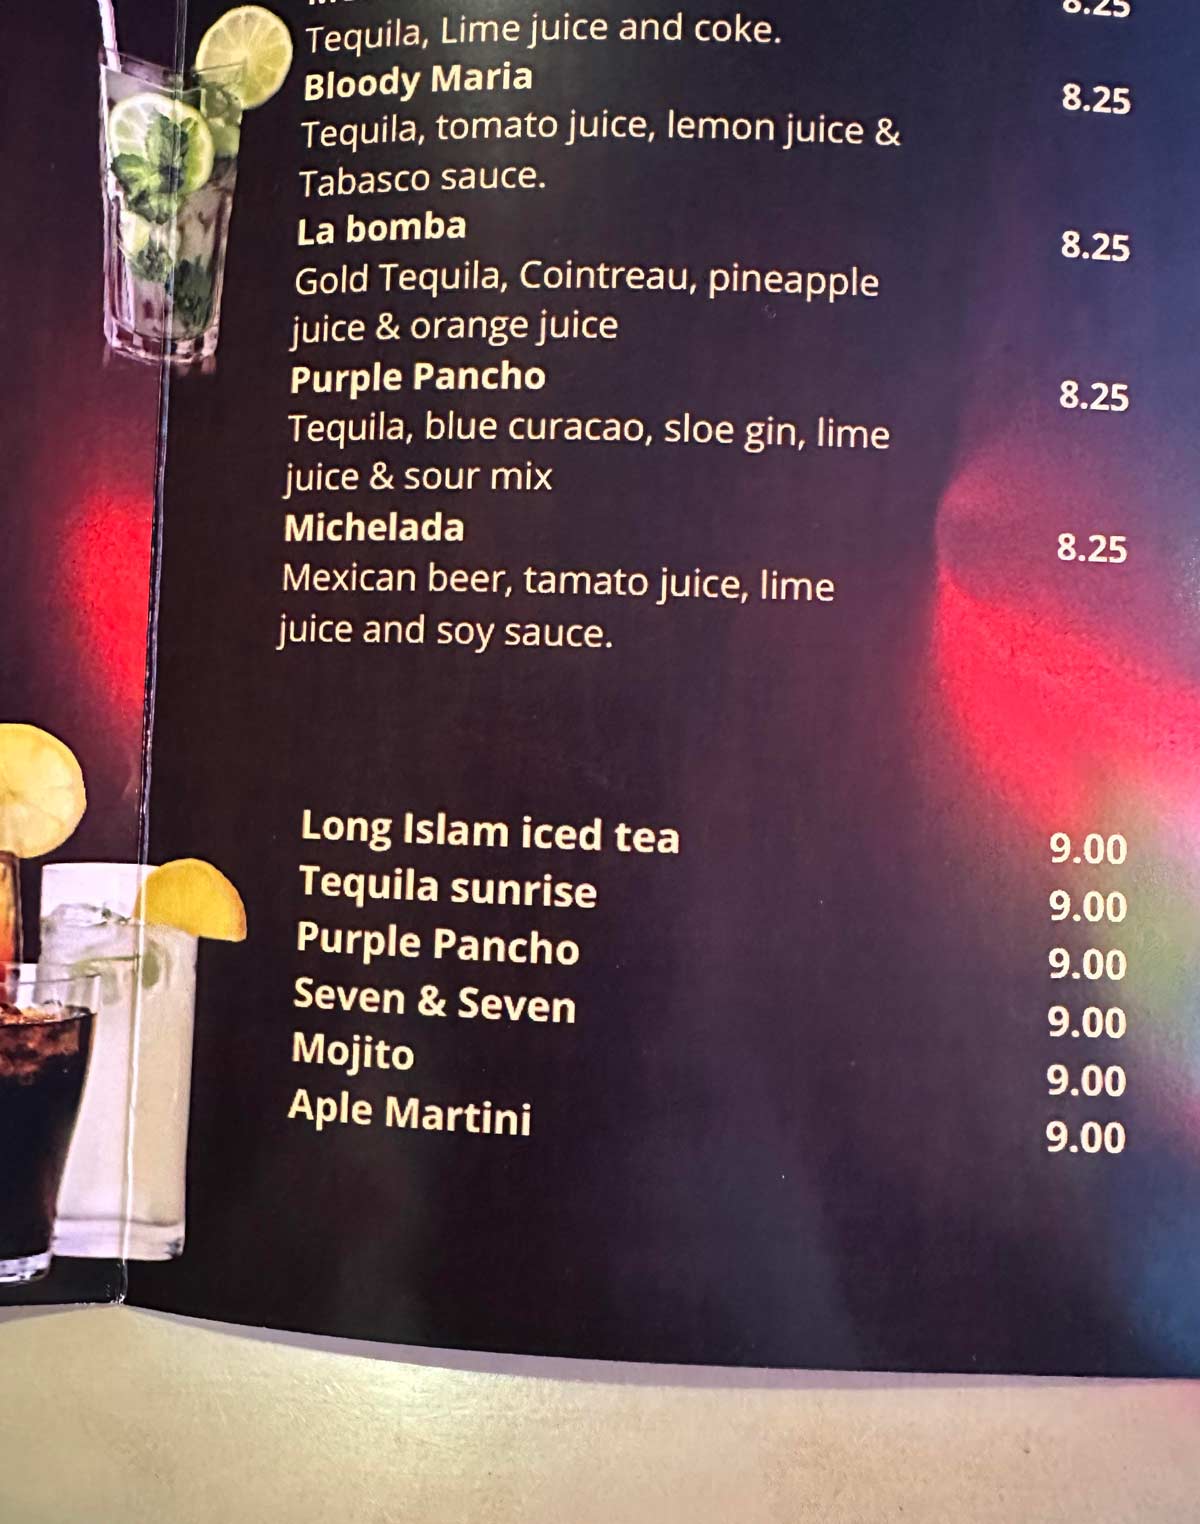 Restaurant near me trying to start a holy war